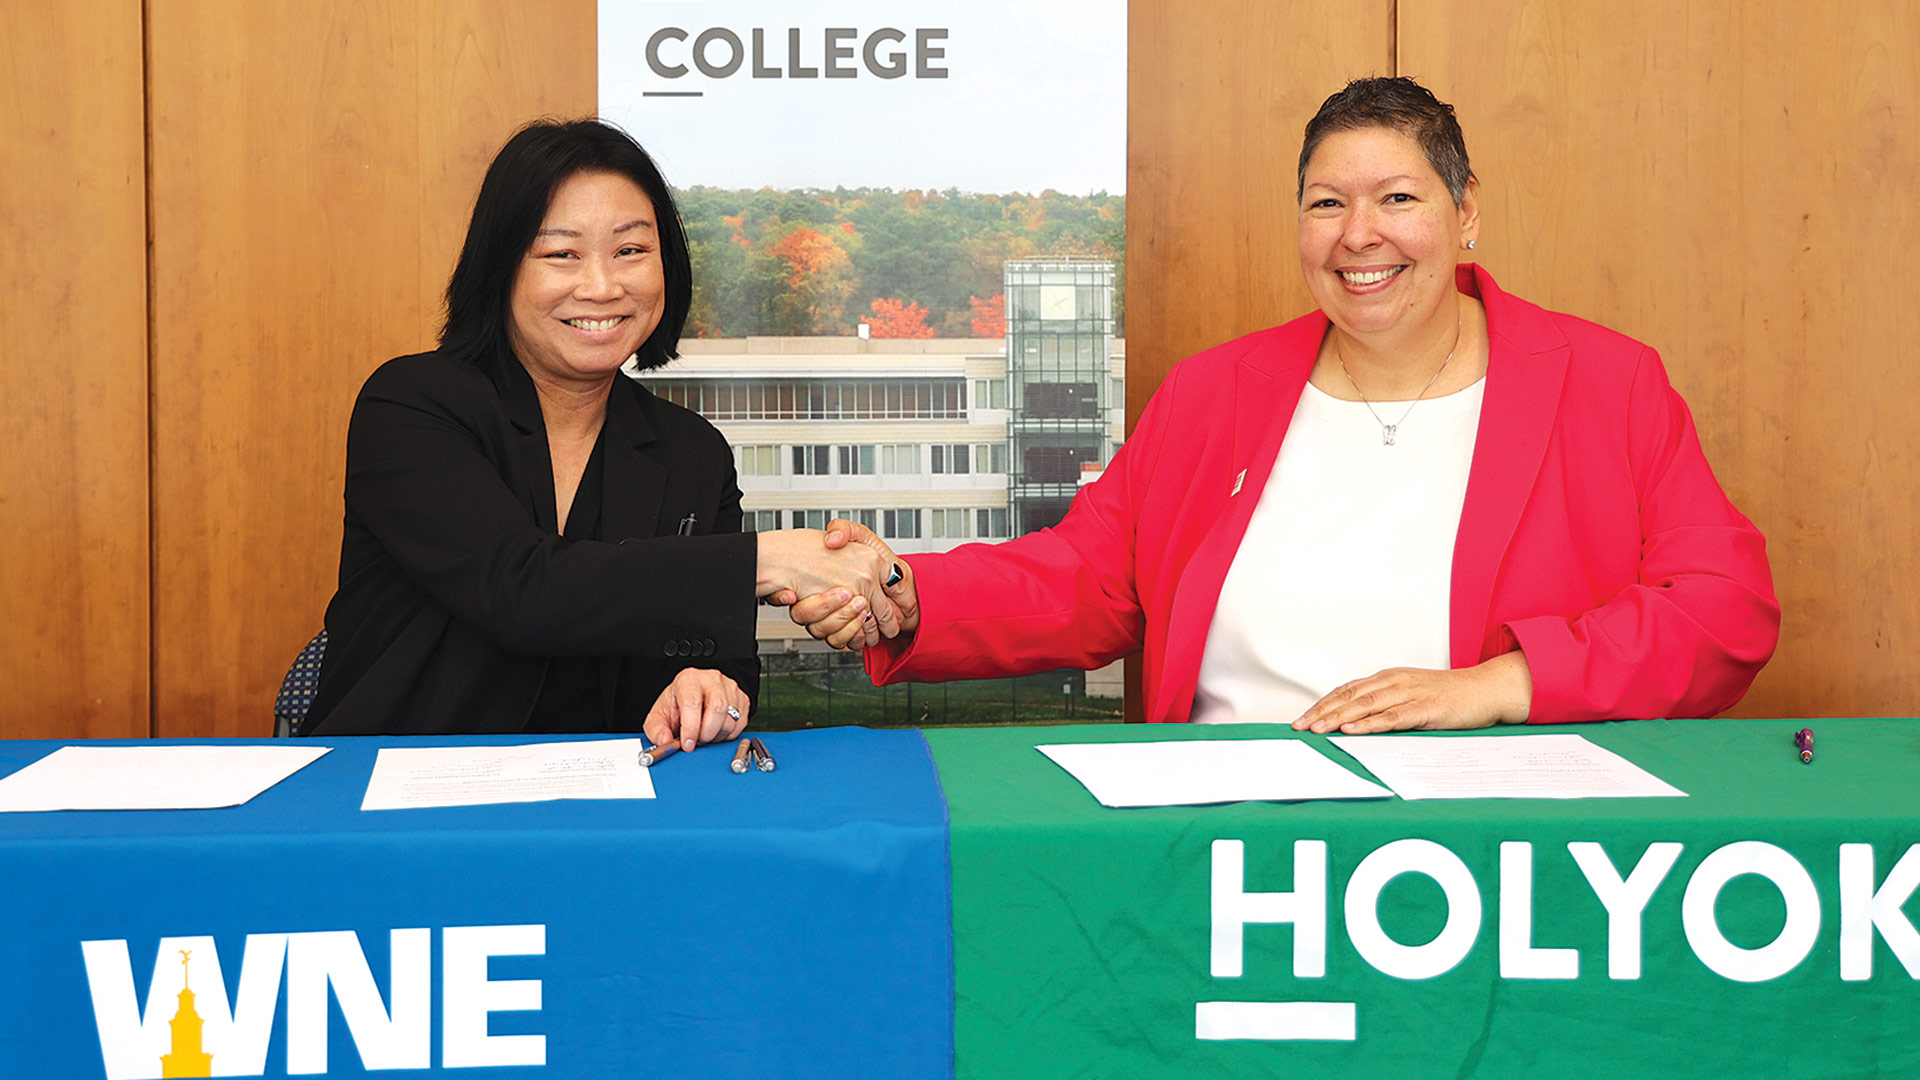 Maria Toyoda (left), provost and senior vice president of Academic Affairs Western New England University (WNE), and Holyoke Community College (HCC) President Christina Royal recently signed a joint admissions